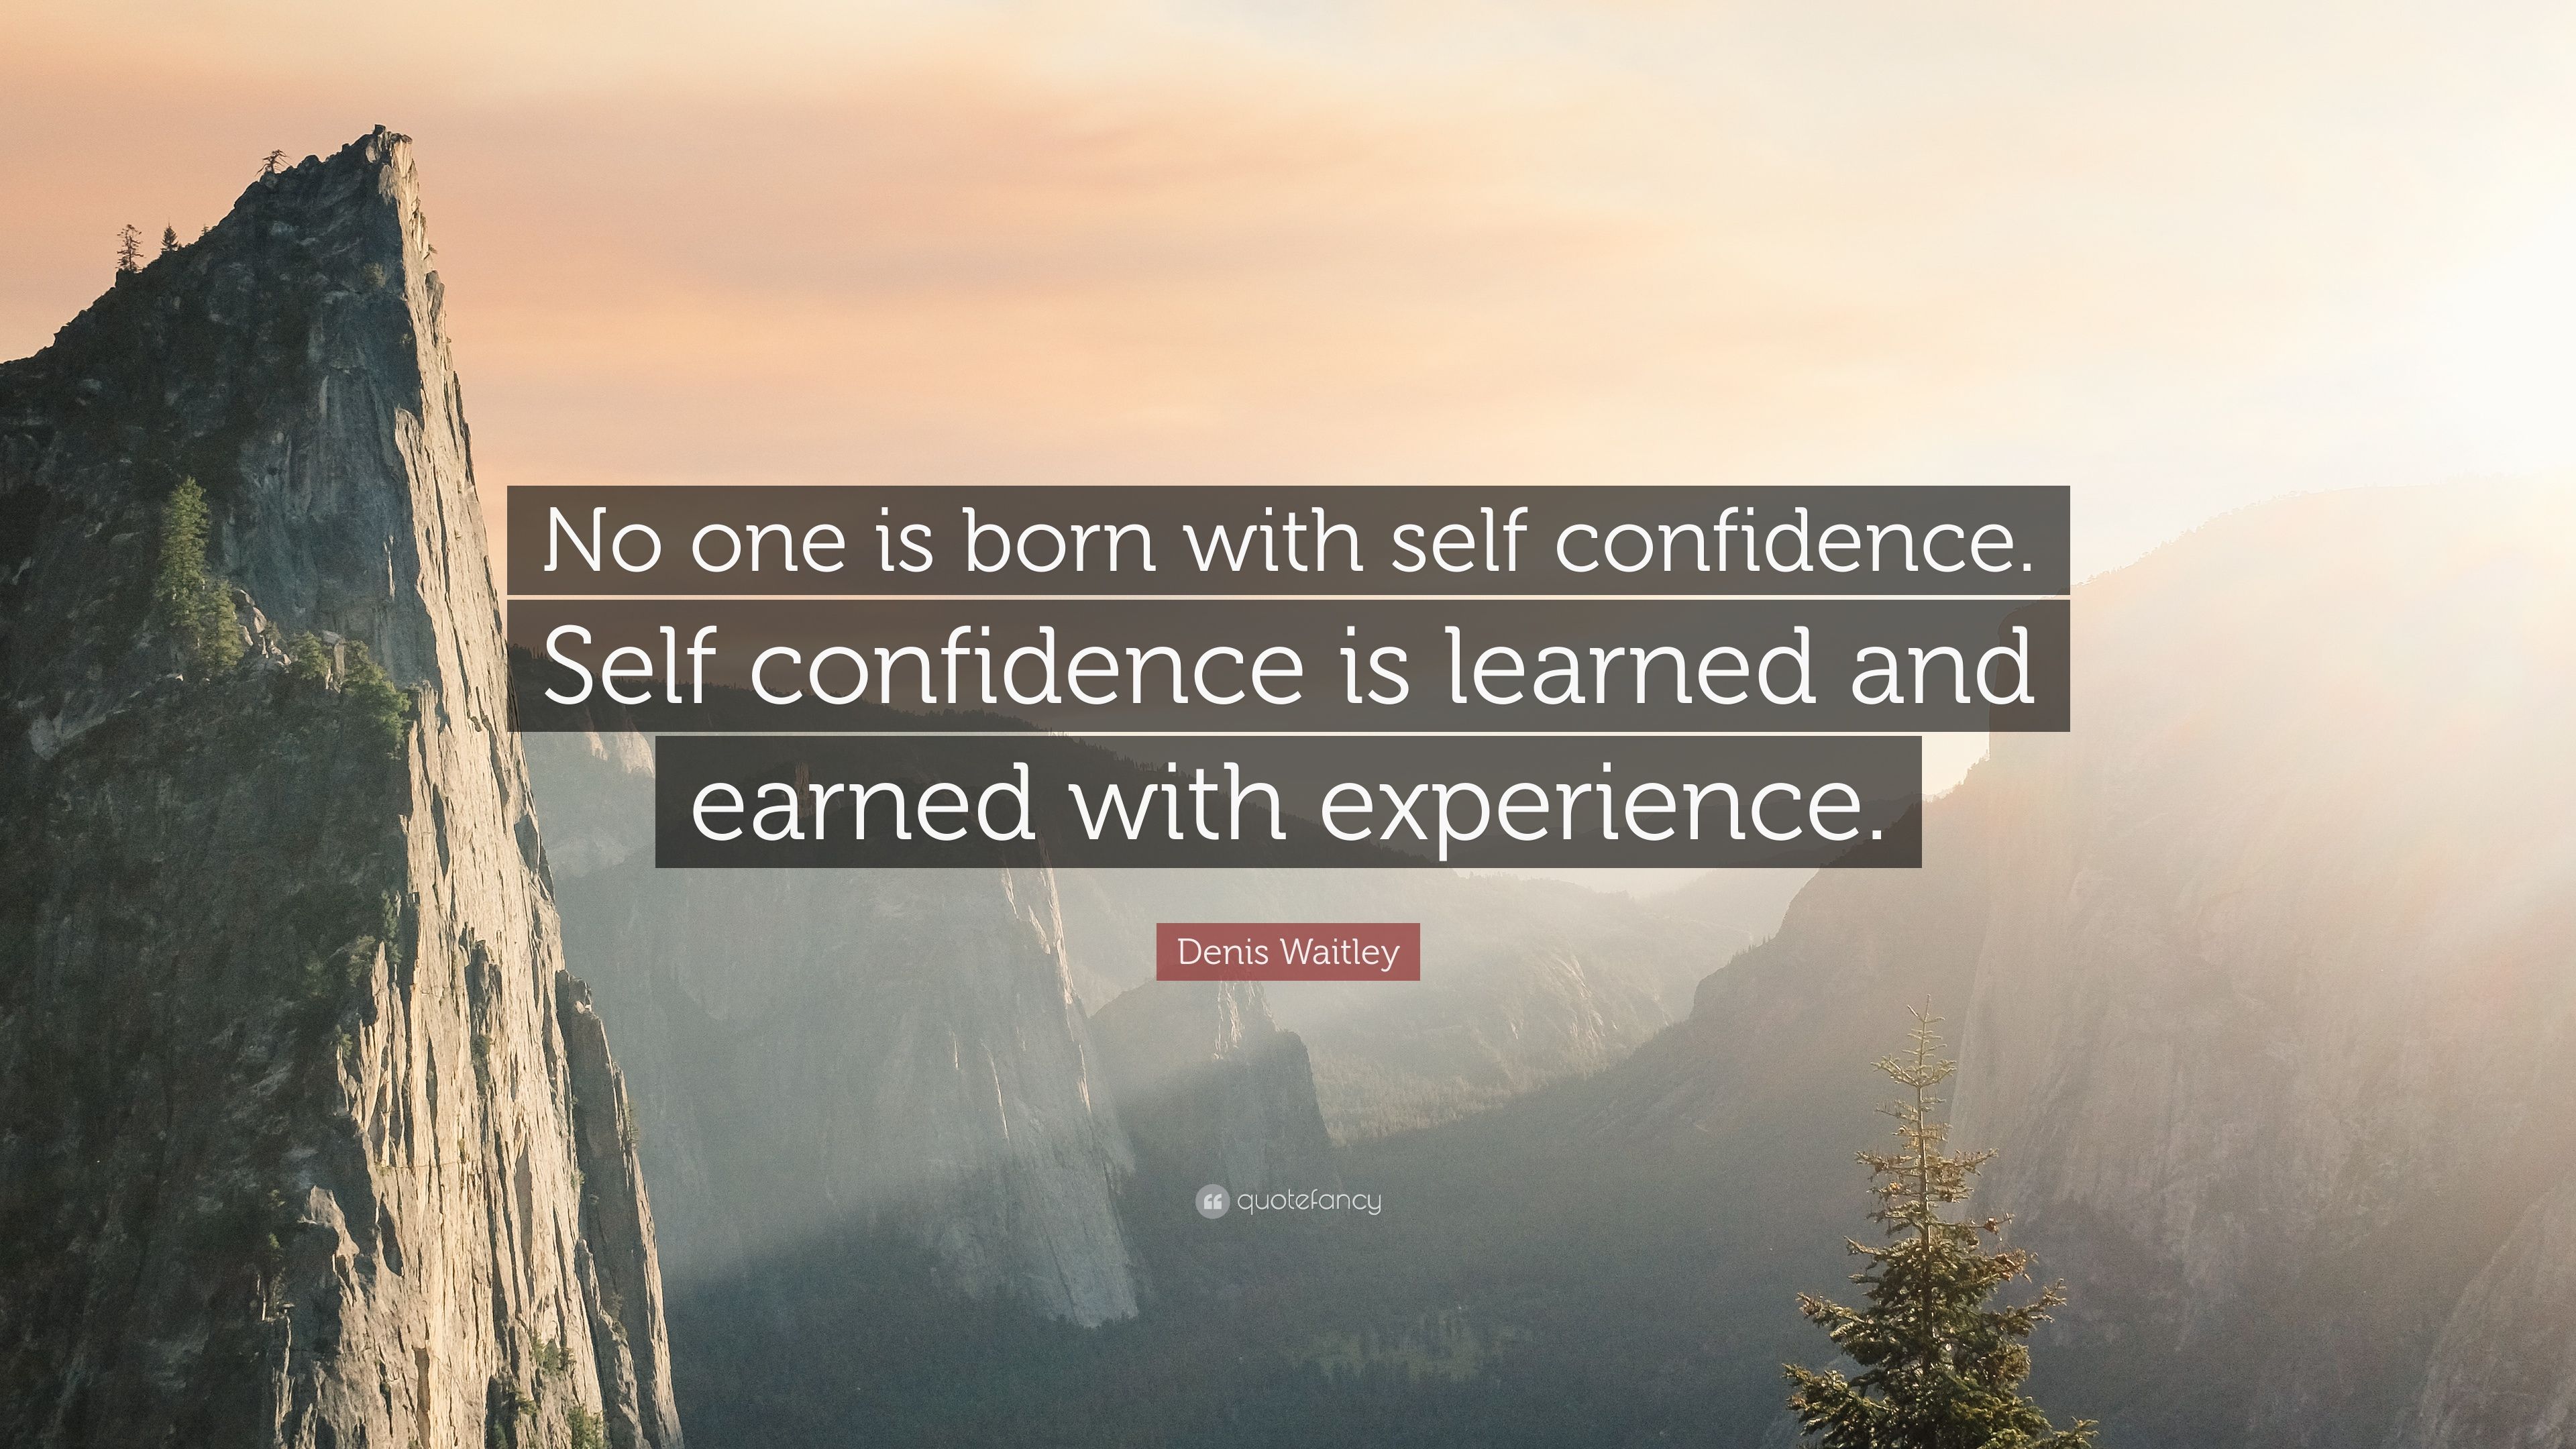 Denis Waitley Quote: “No one is born with self confidence. Self confidence is learned and earned